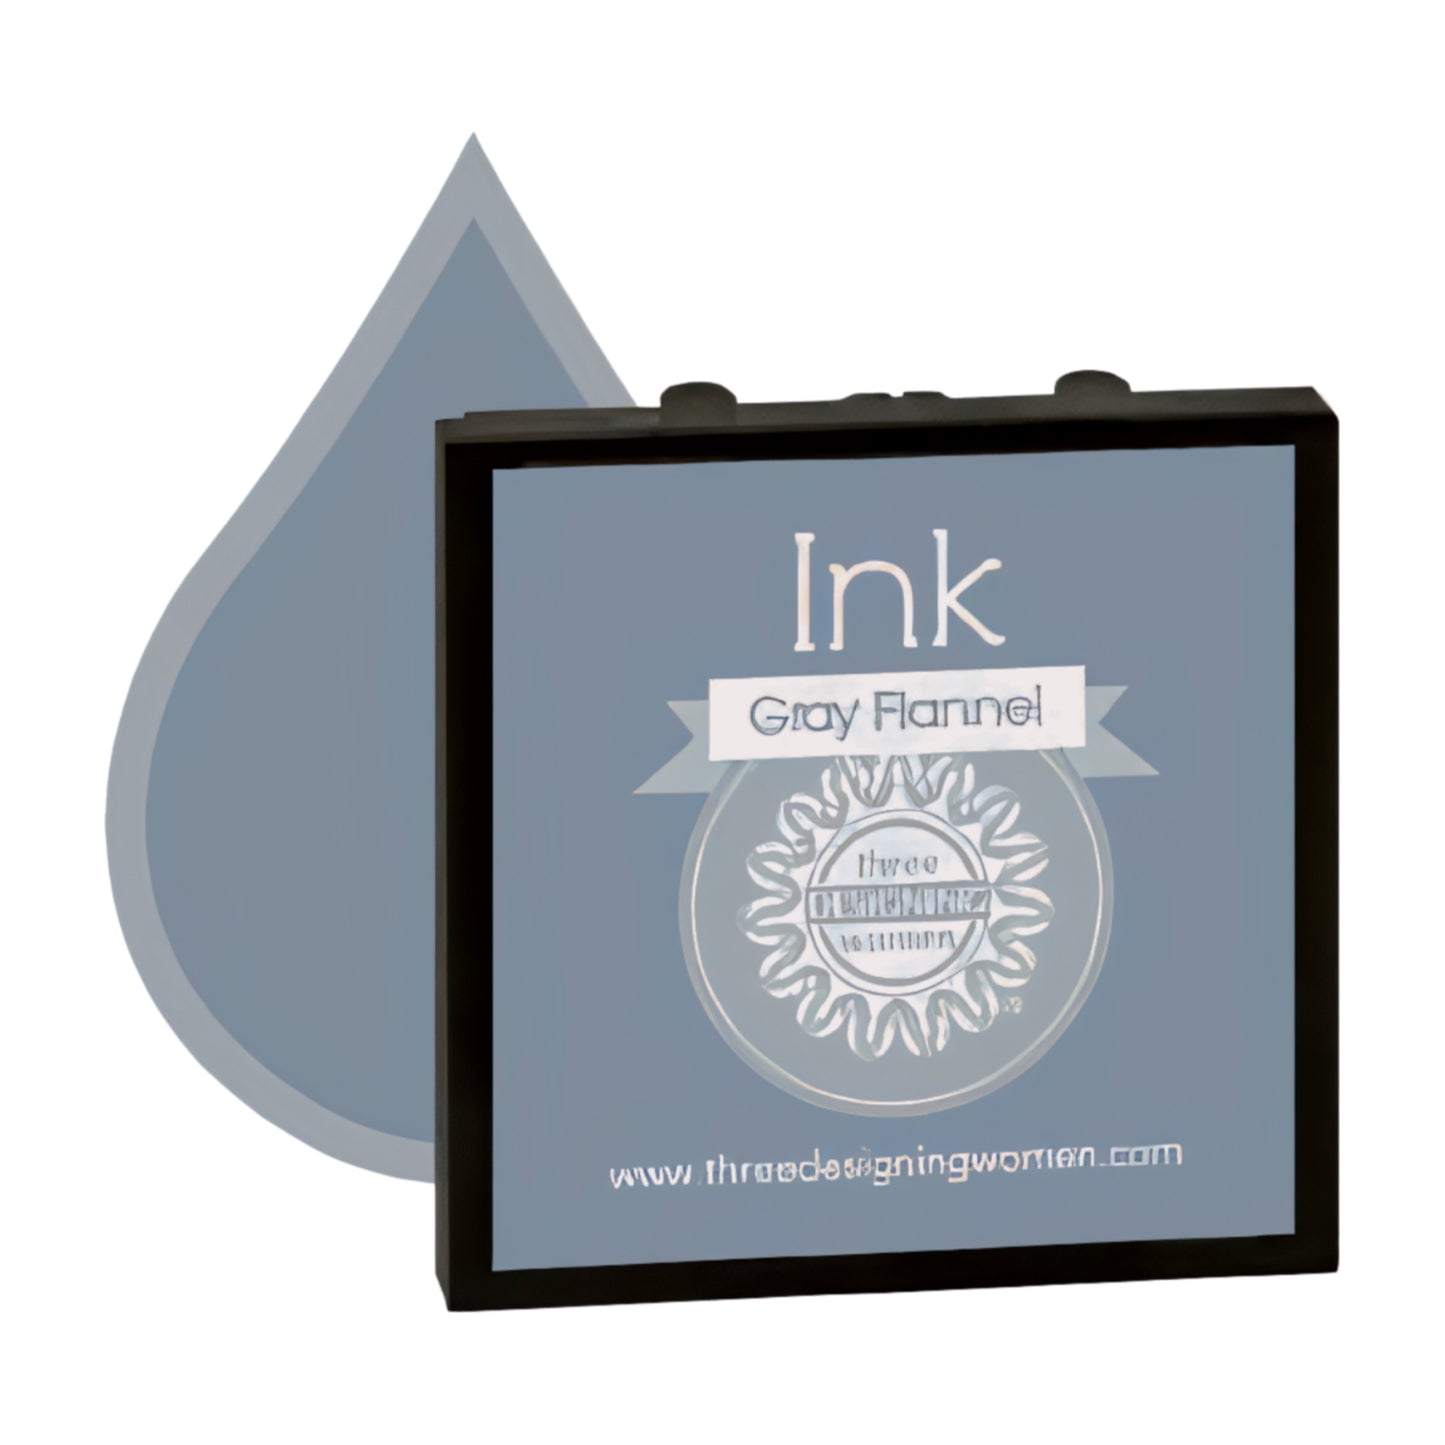 Ink Replacement Cartridge "Gray Flannel" for Self-Inking Stampers Three Designing Women